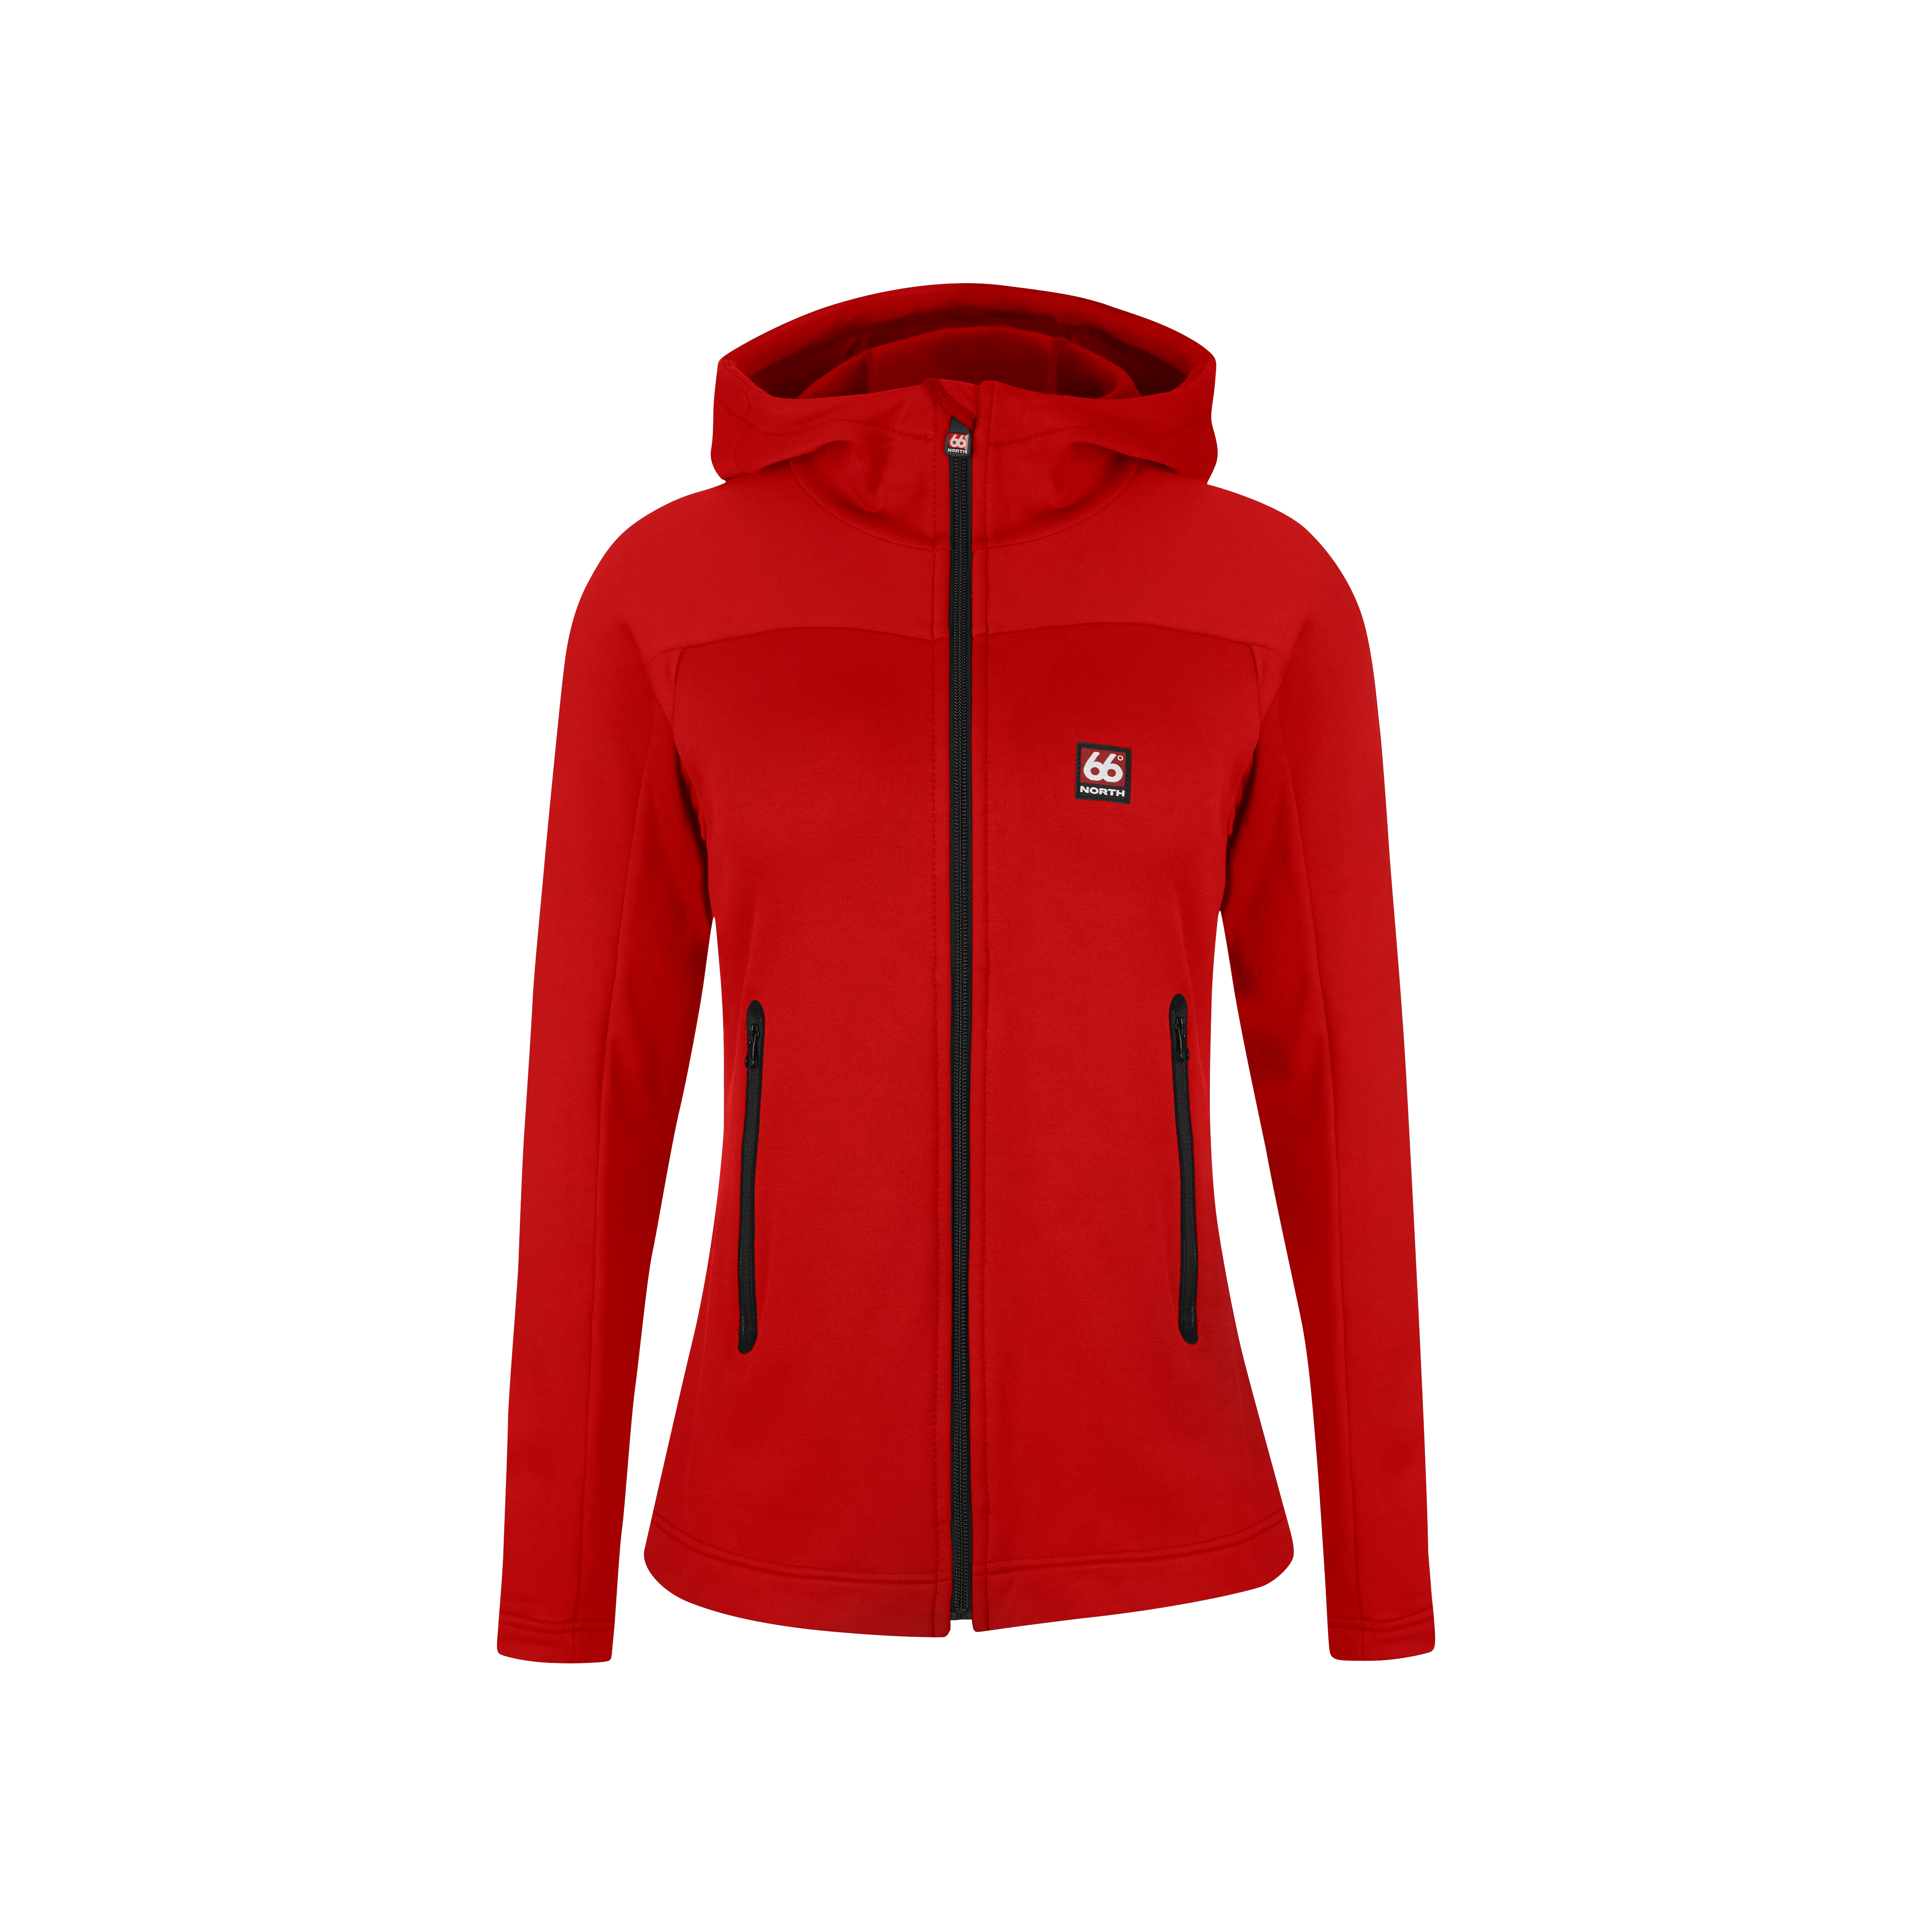 66 North Womens Snfell TopsandVests - Red - M